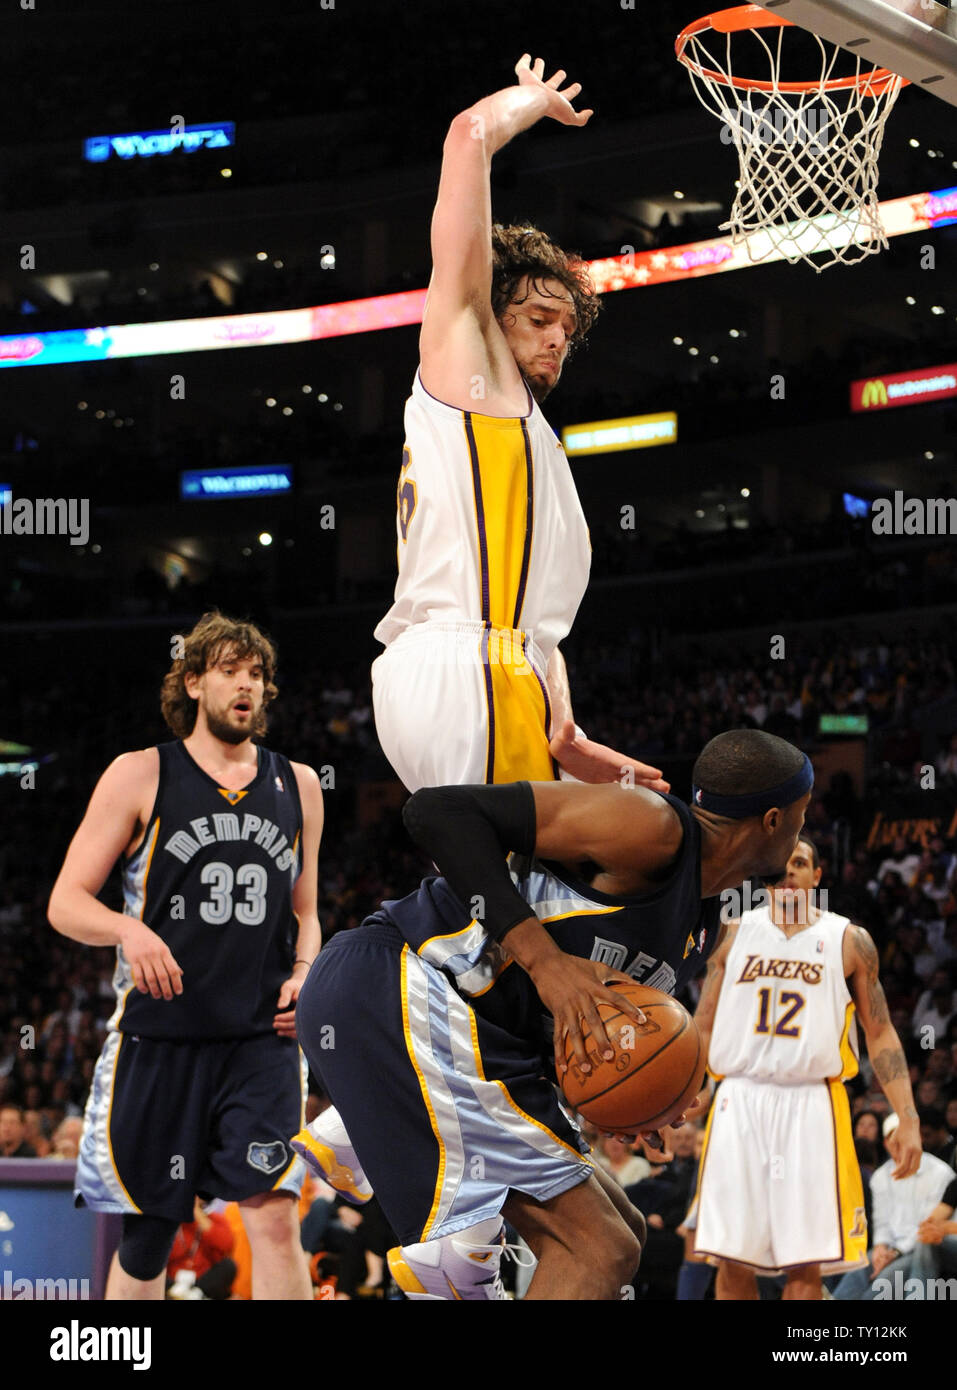 Los Angeles Lakers center Pau Gasol (16) of Spain, fouls Hakim Warrick as  his brother and Memphis Grizzlies center Marc Gasol (33) looks on during  the second half of an NBA basketball